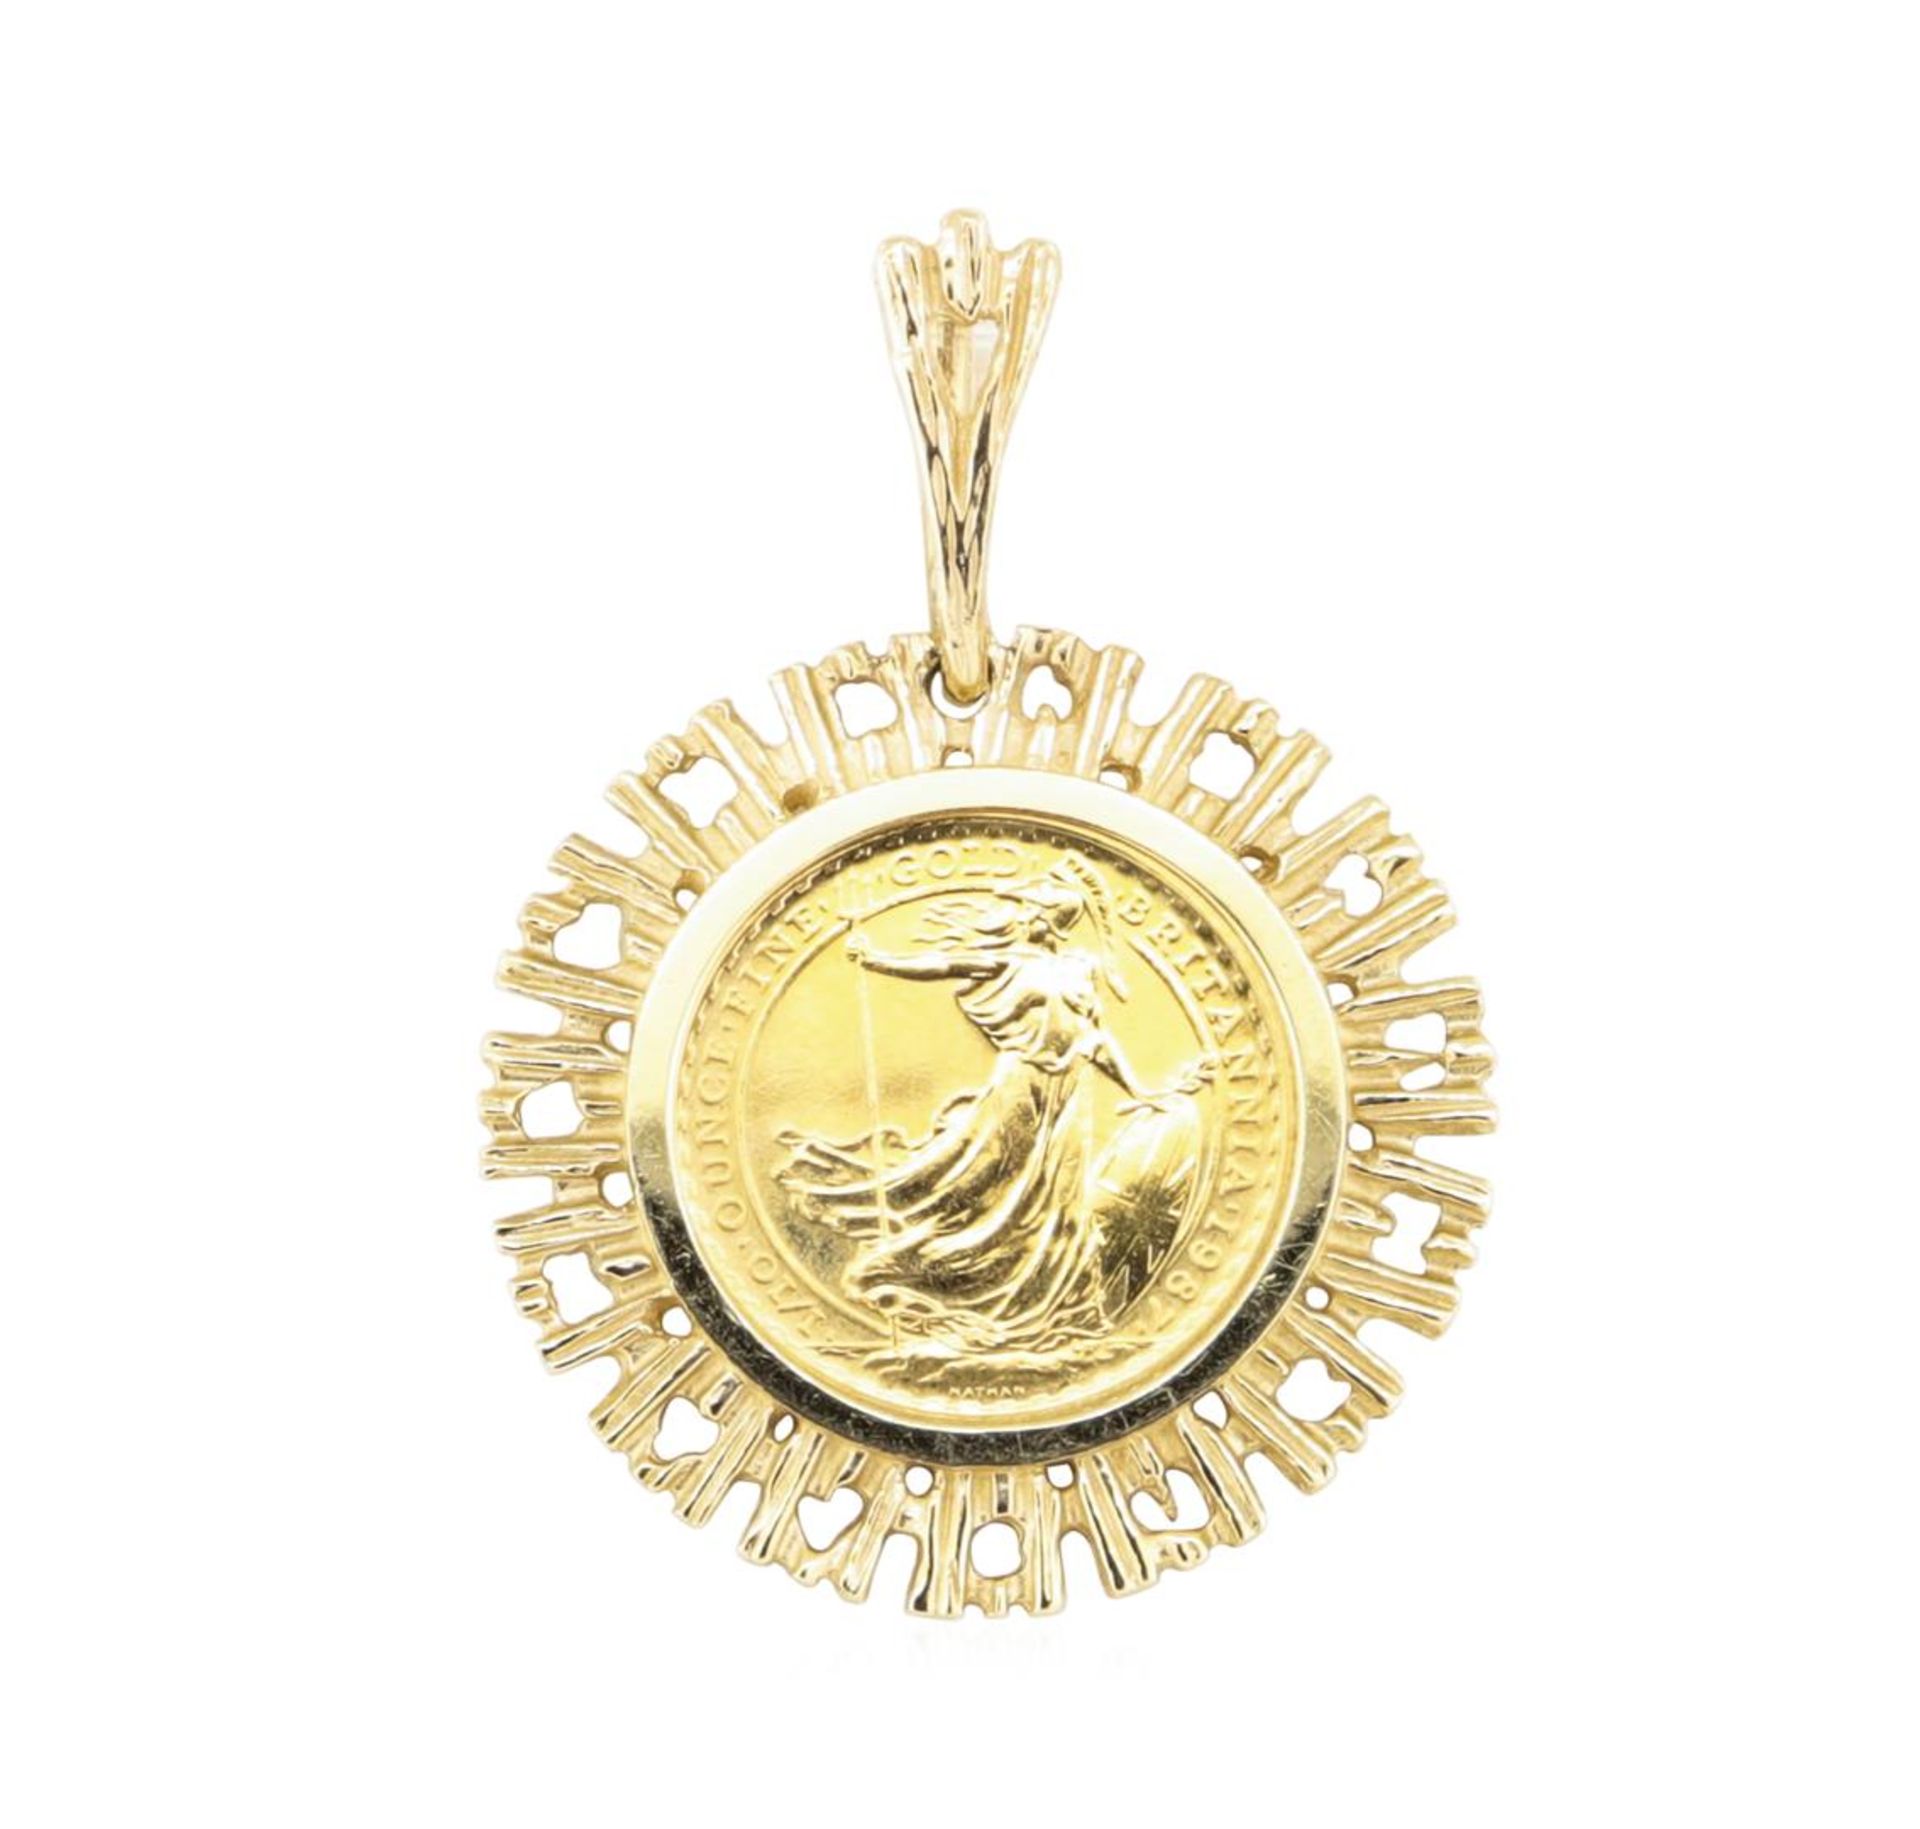 1/10th British Sovereign Coin Pendant - 14KT - 24KT Yellow Gold - Image 2 of 2